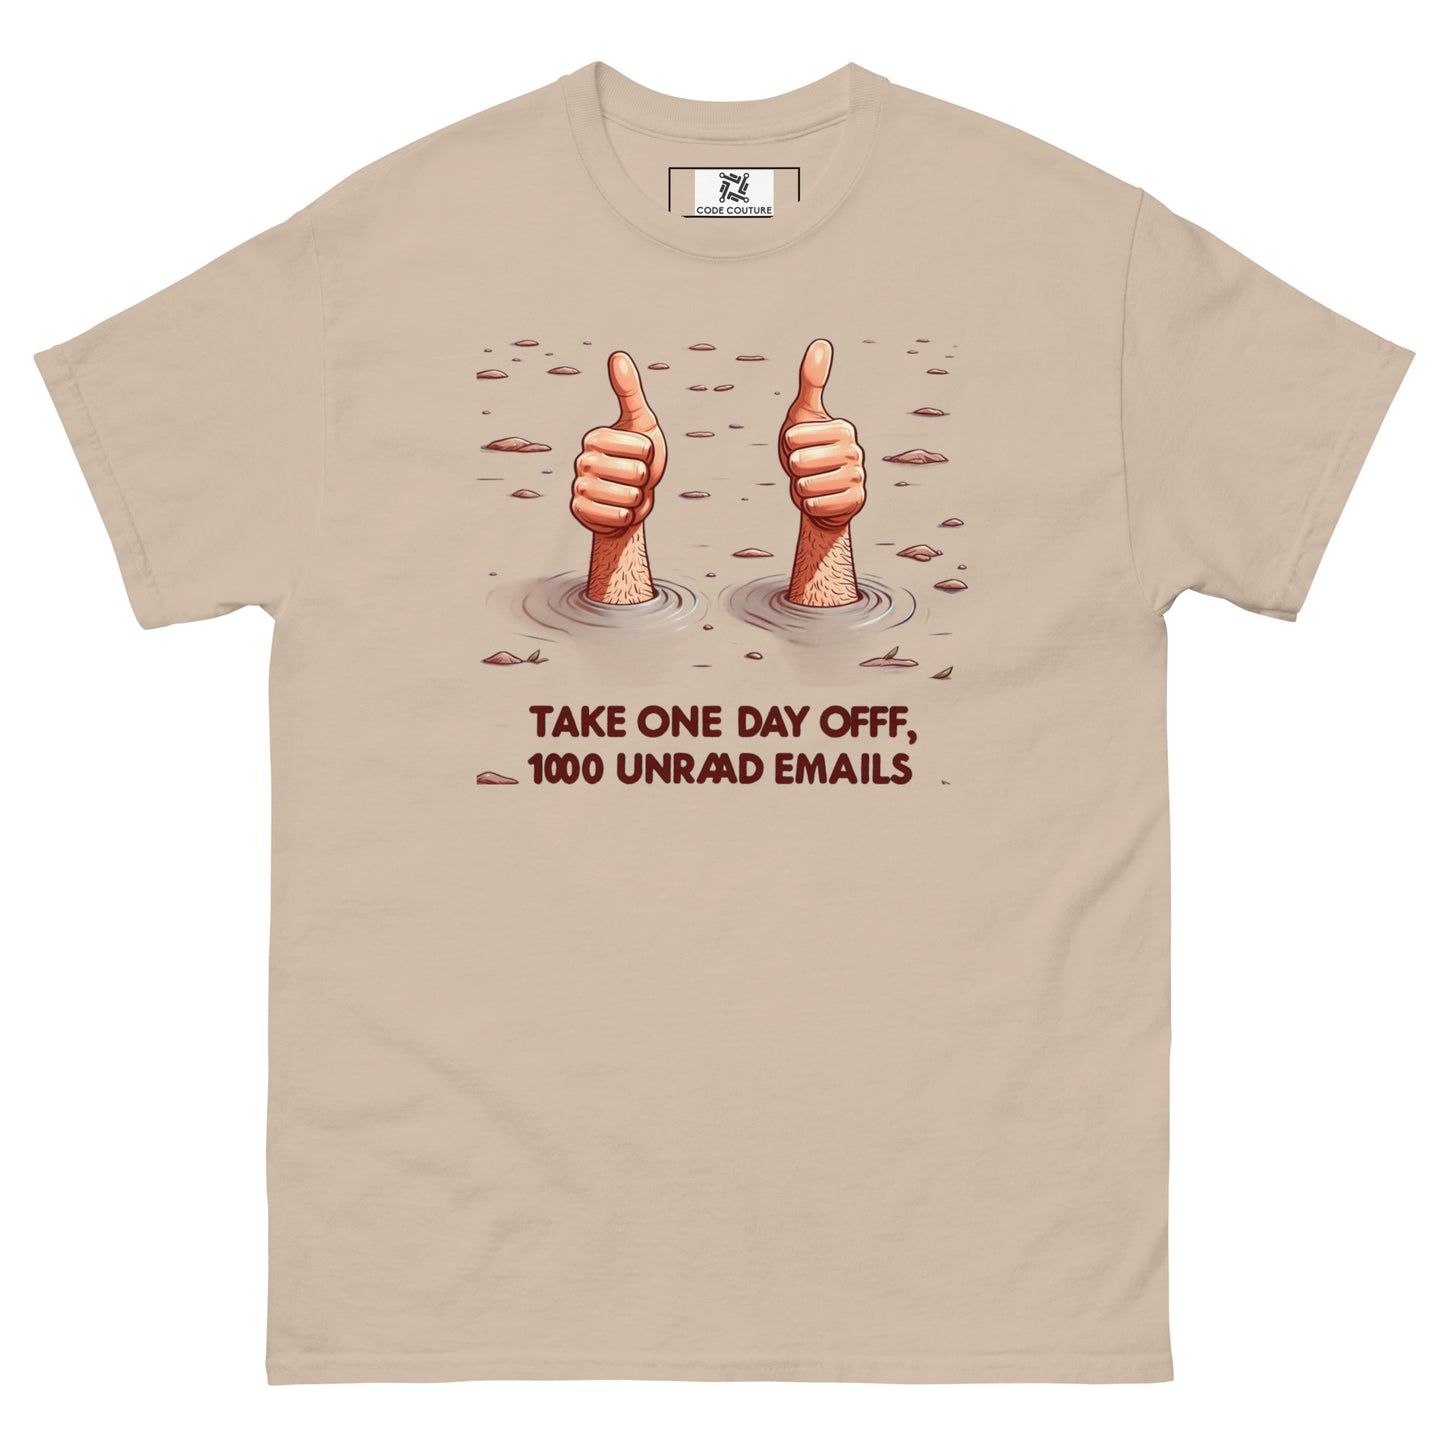 Take a Day Off tee